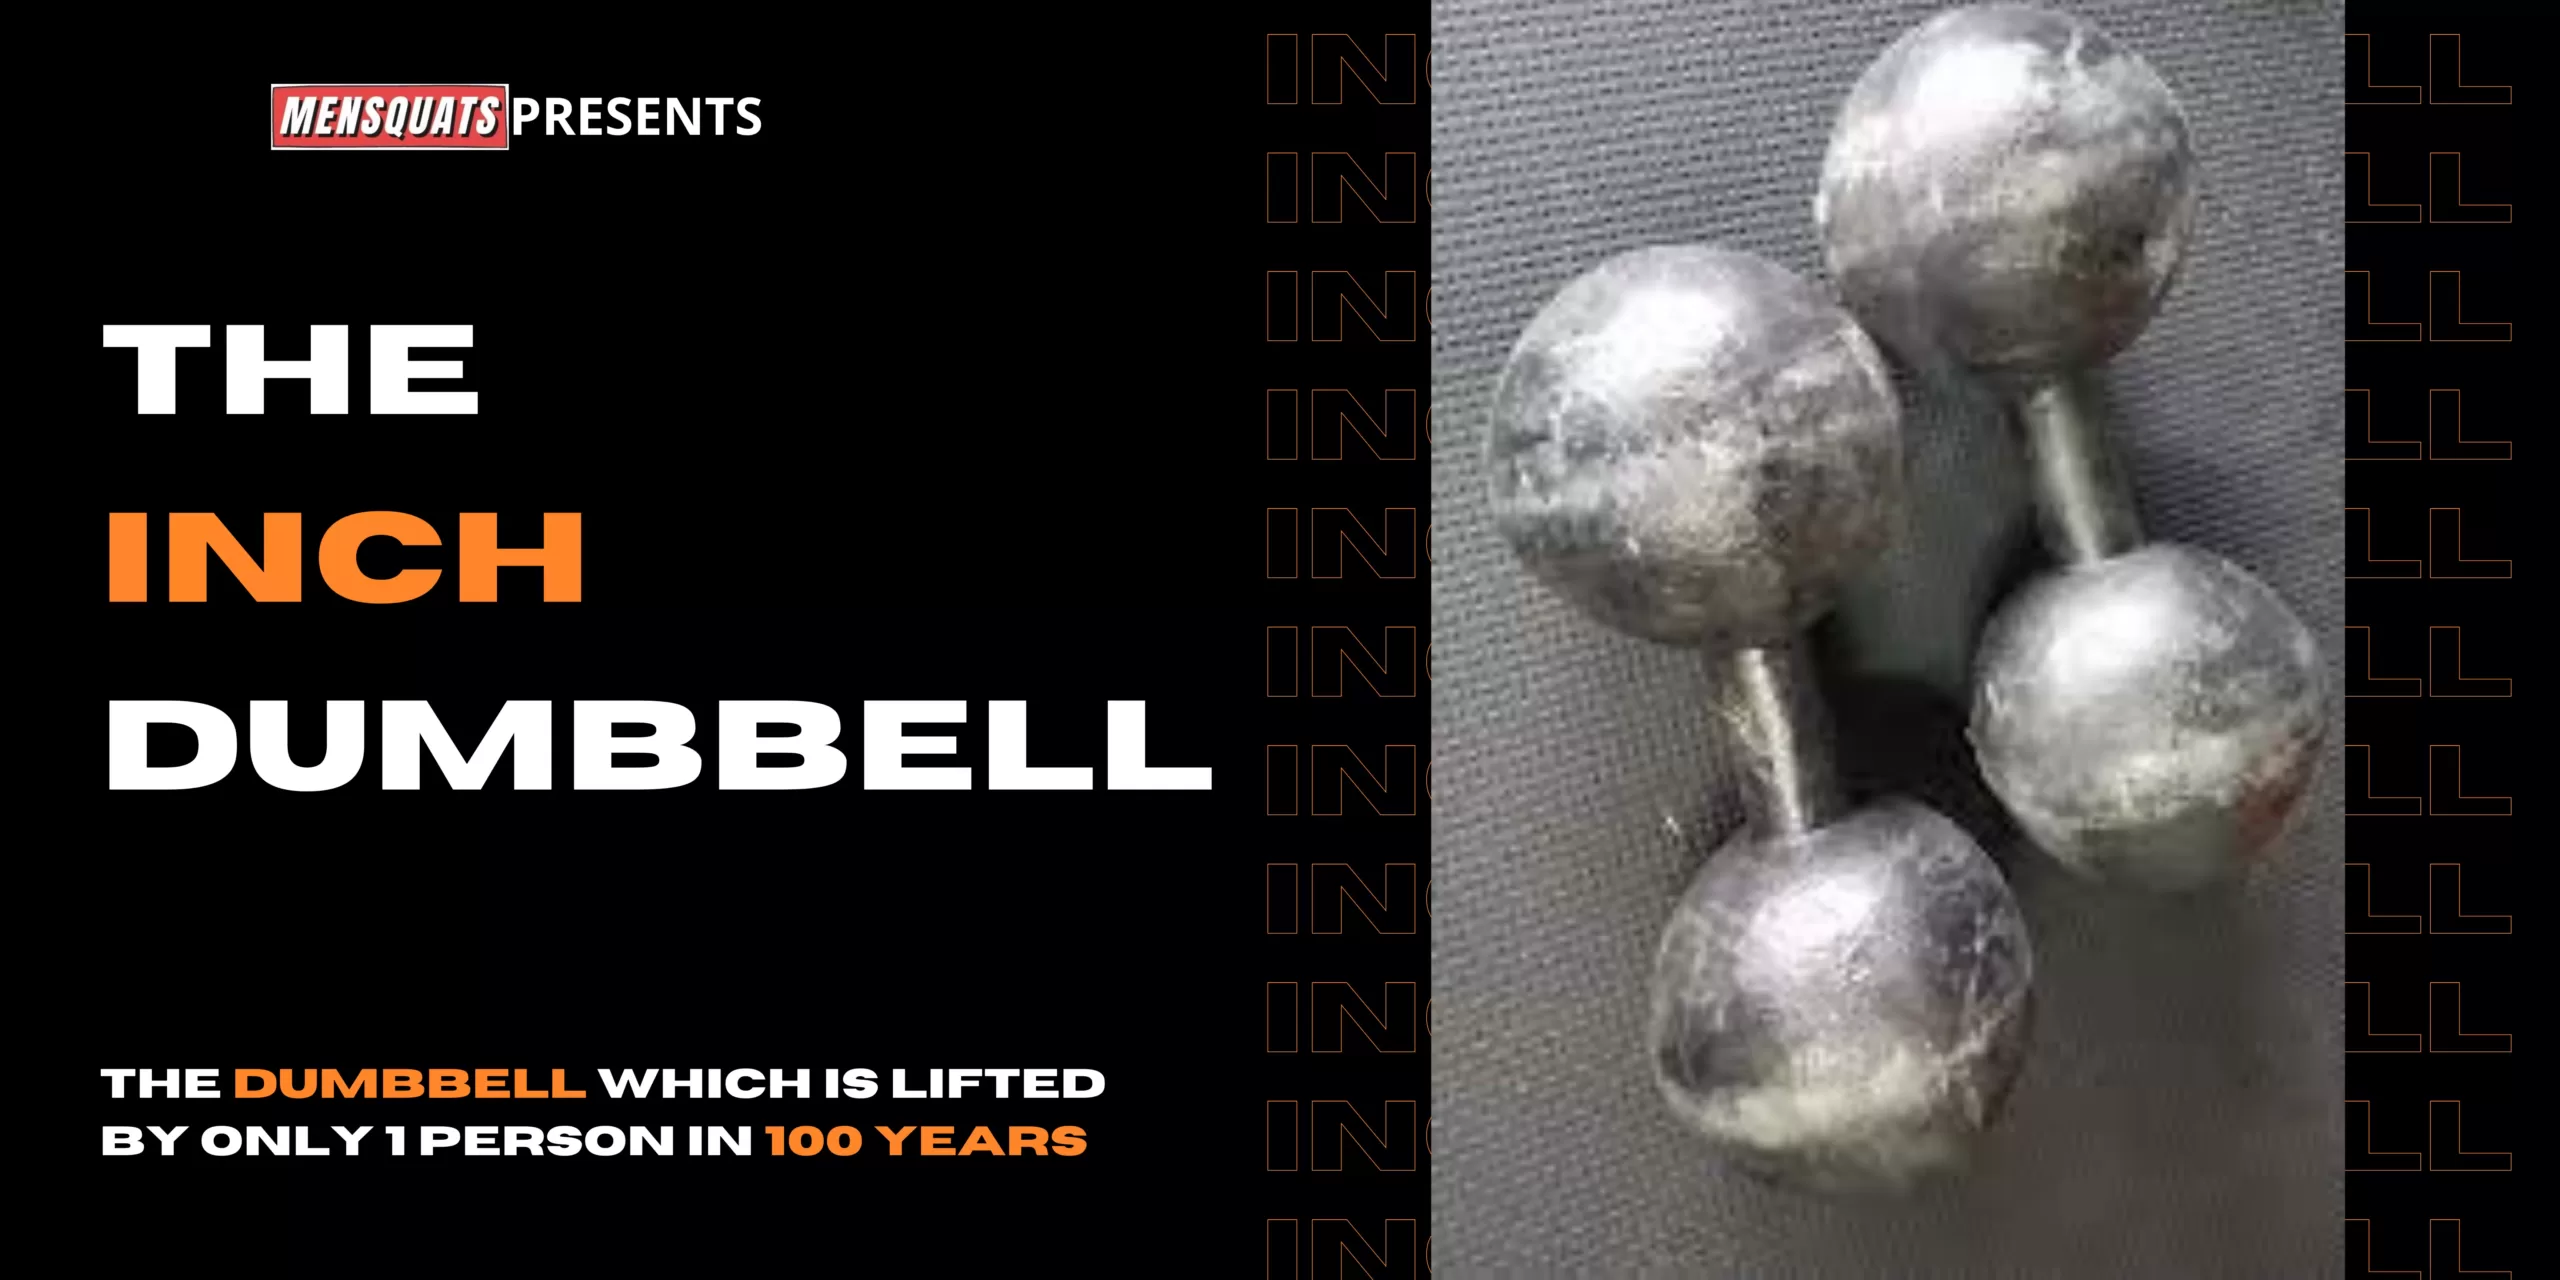 Thomas inch dumbbell dimensions